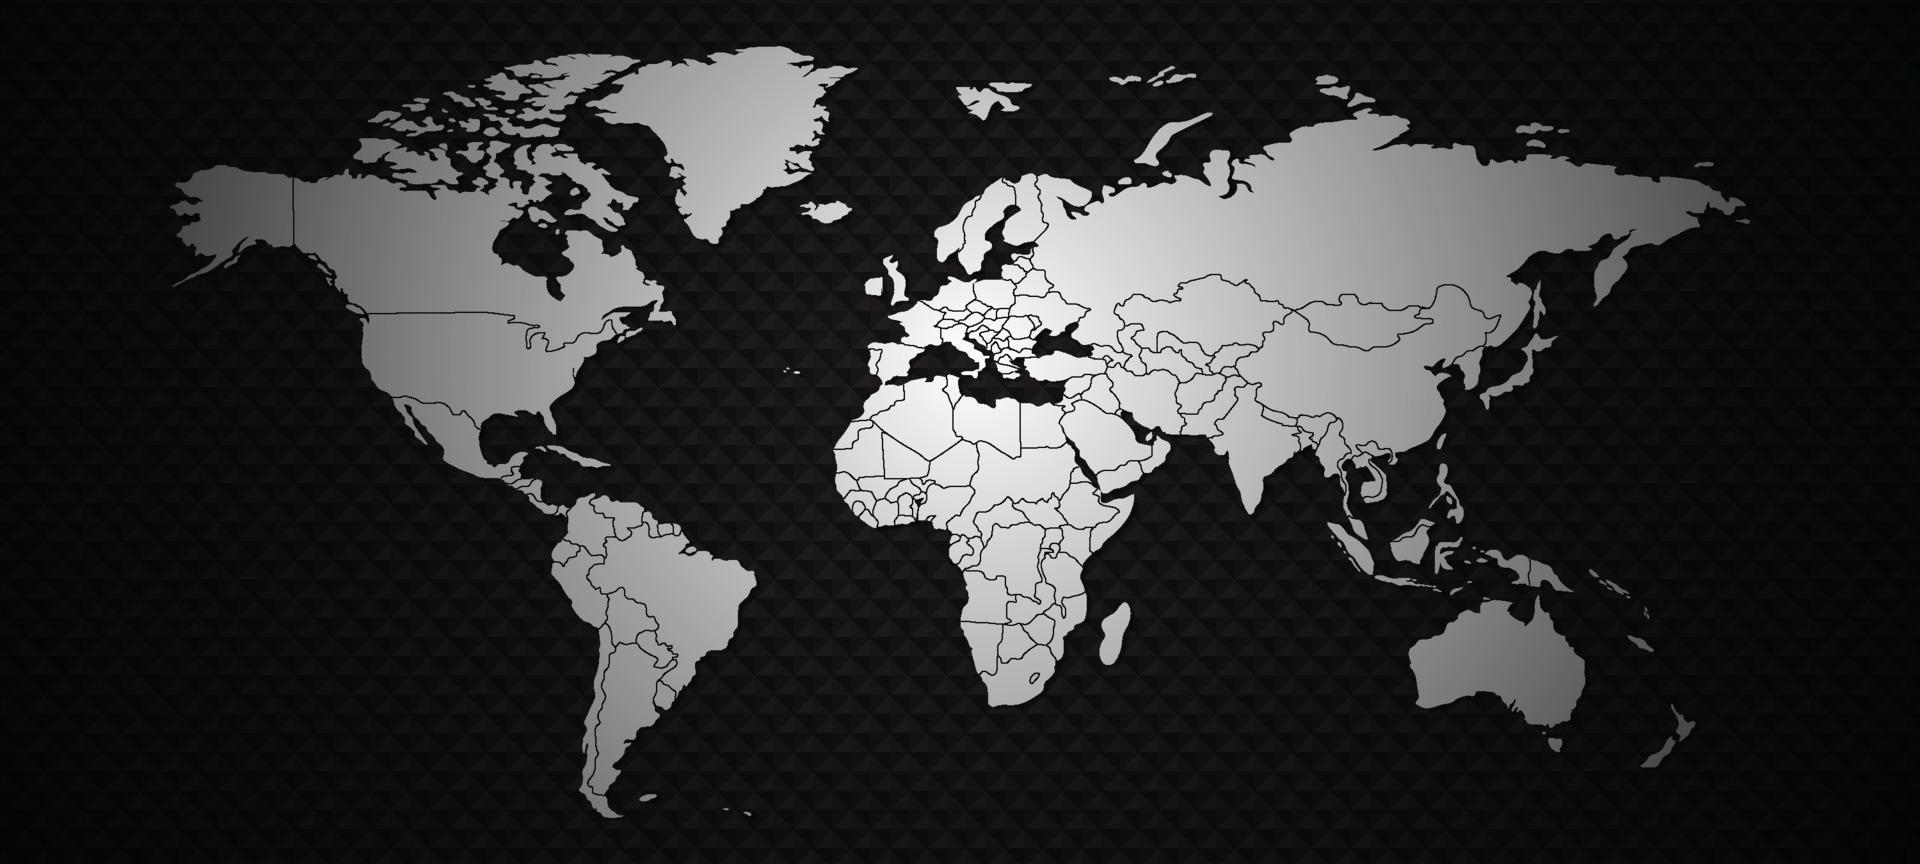 Black and White World Map vector